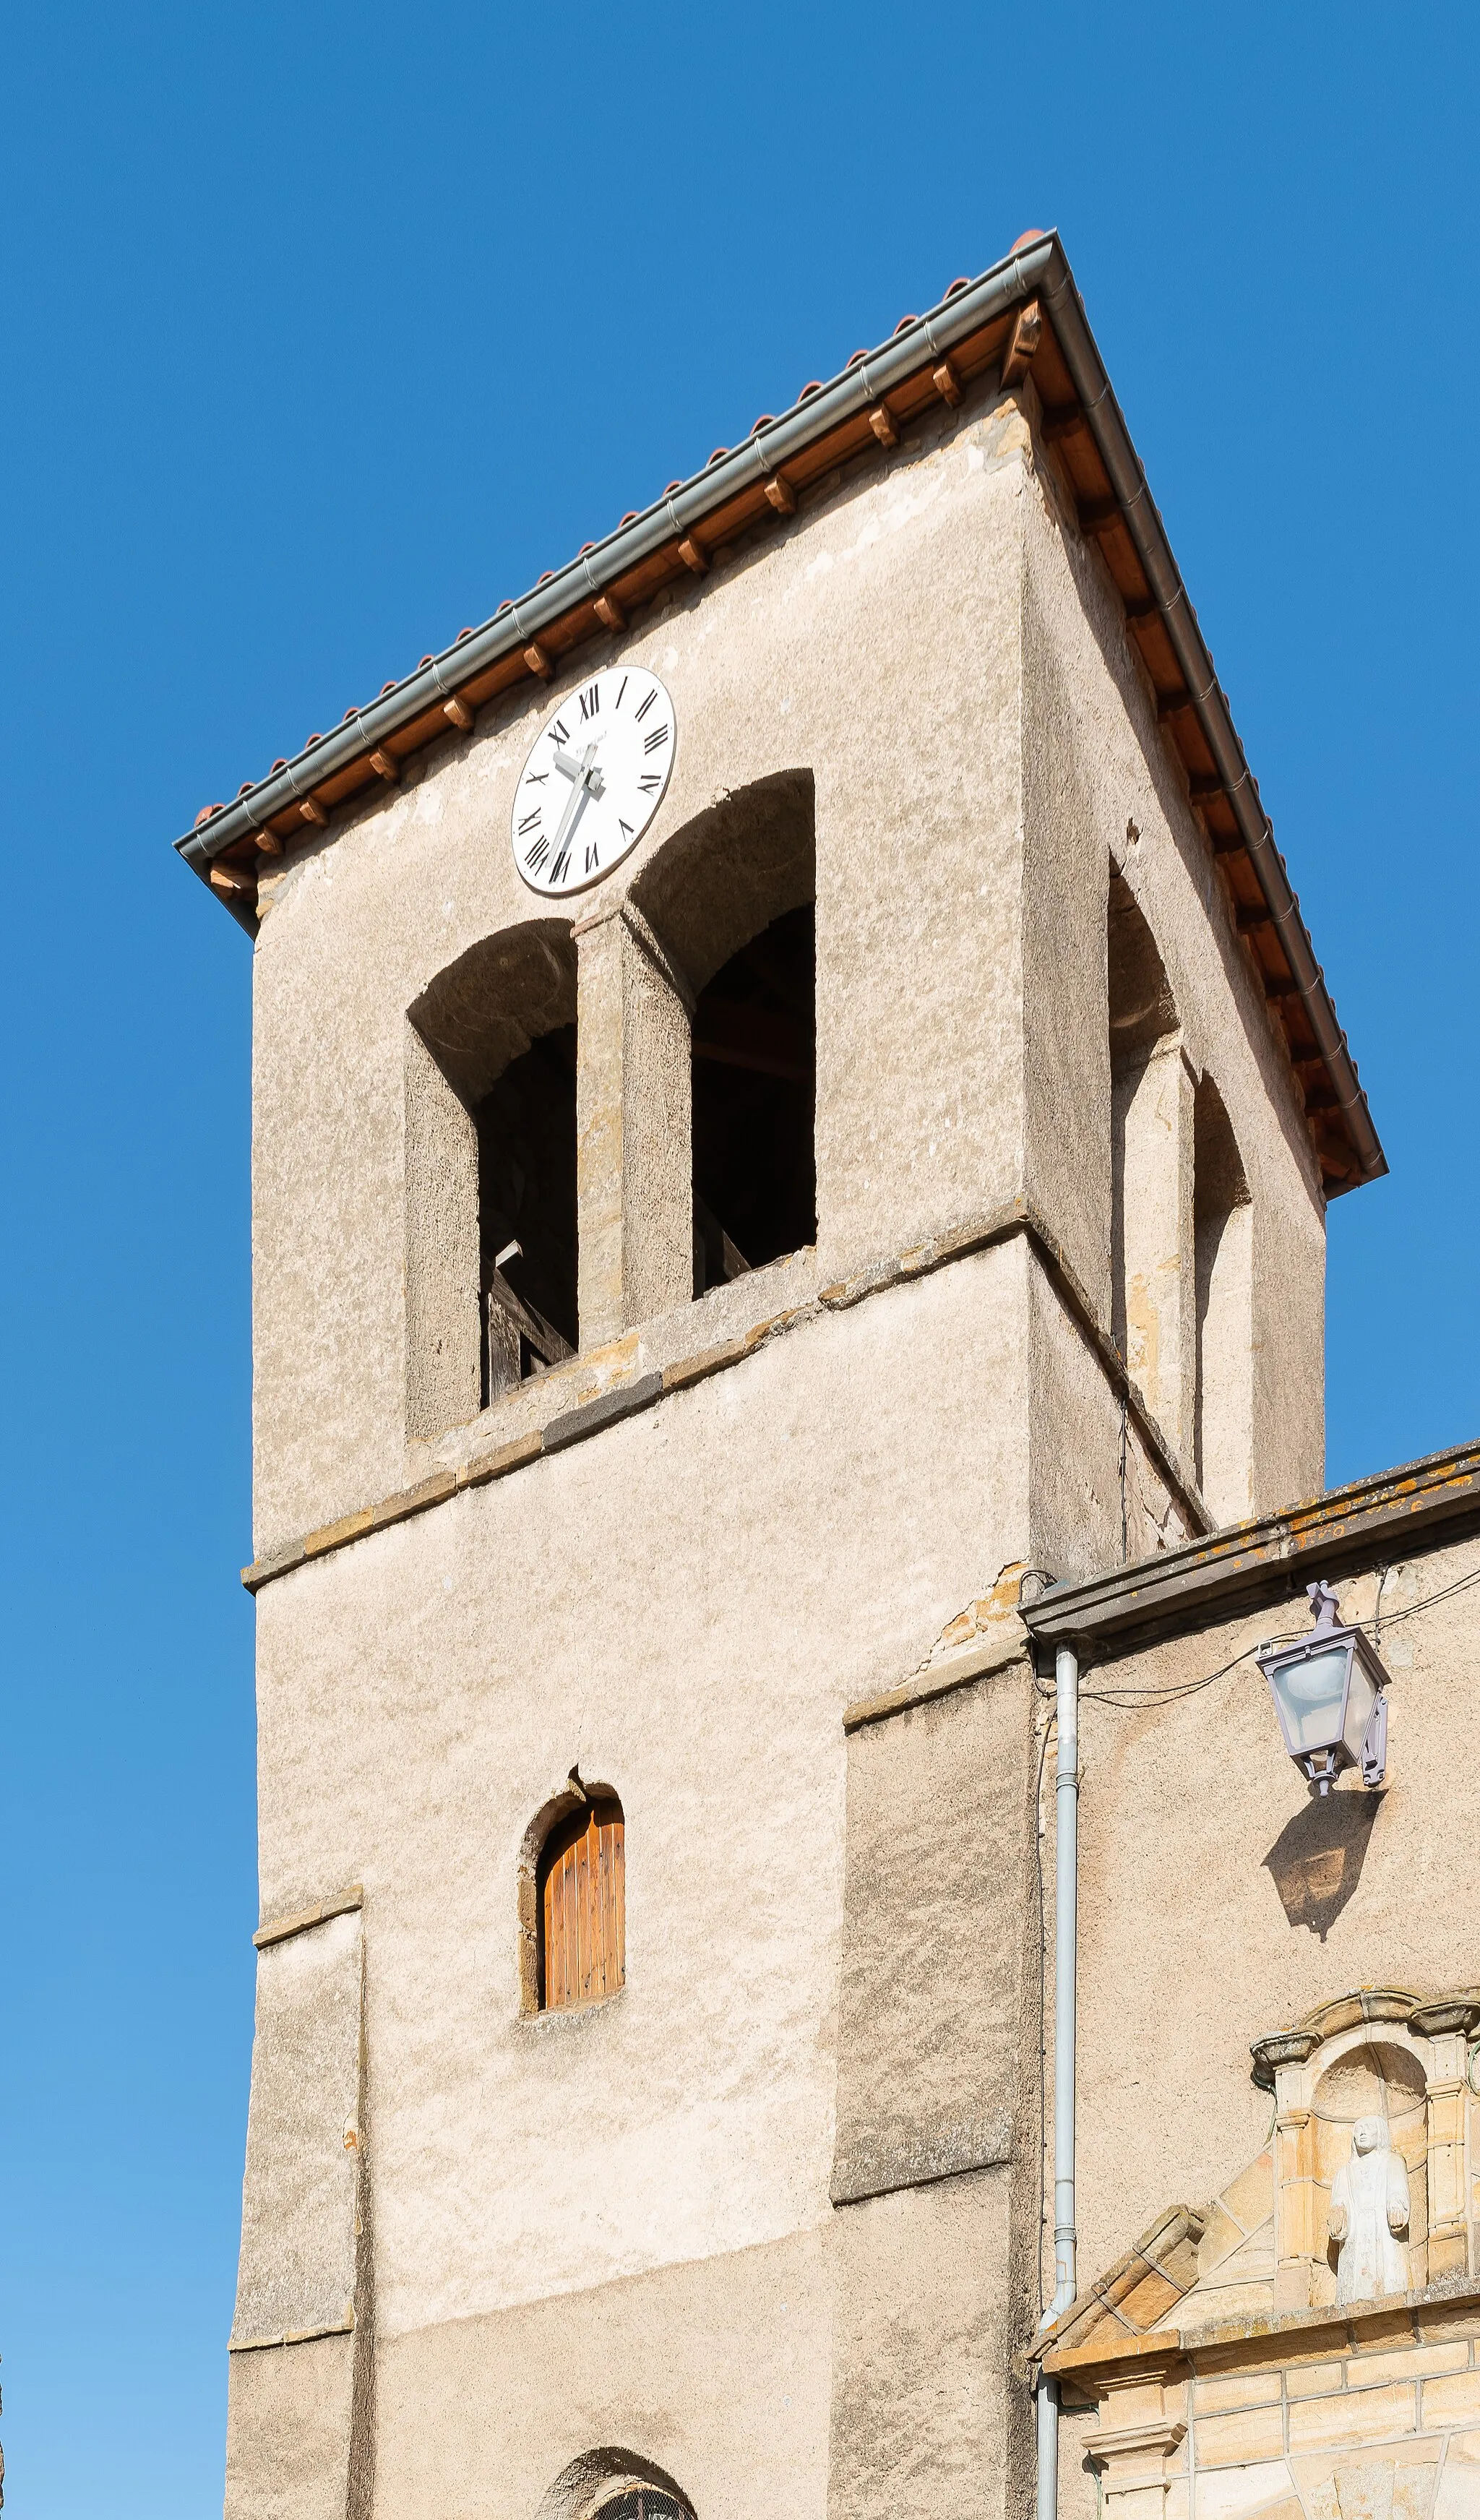 Photo showing: Bell tower of the Saint Maurice church in Saint-Maurice, Puy-de-Dôme, France